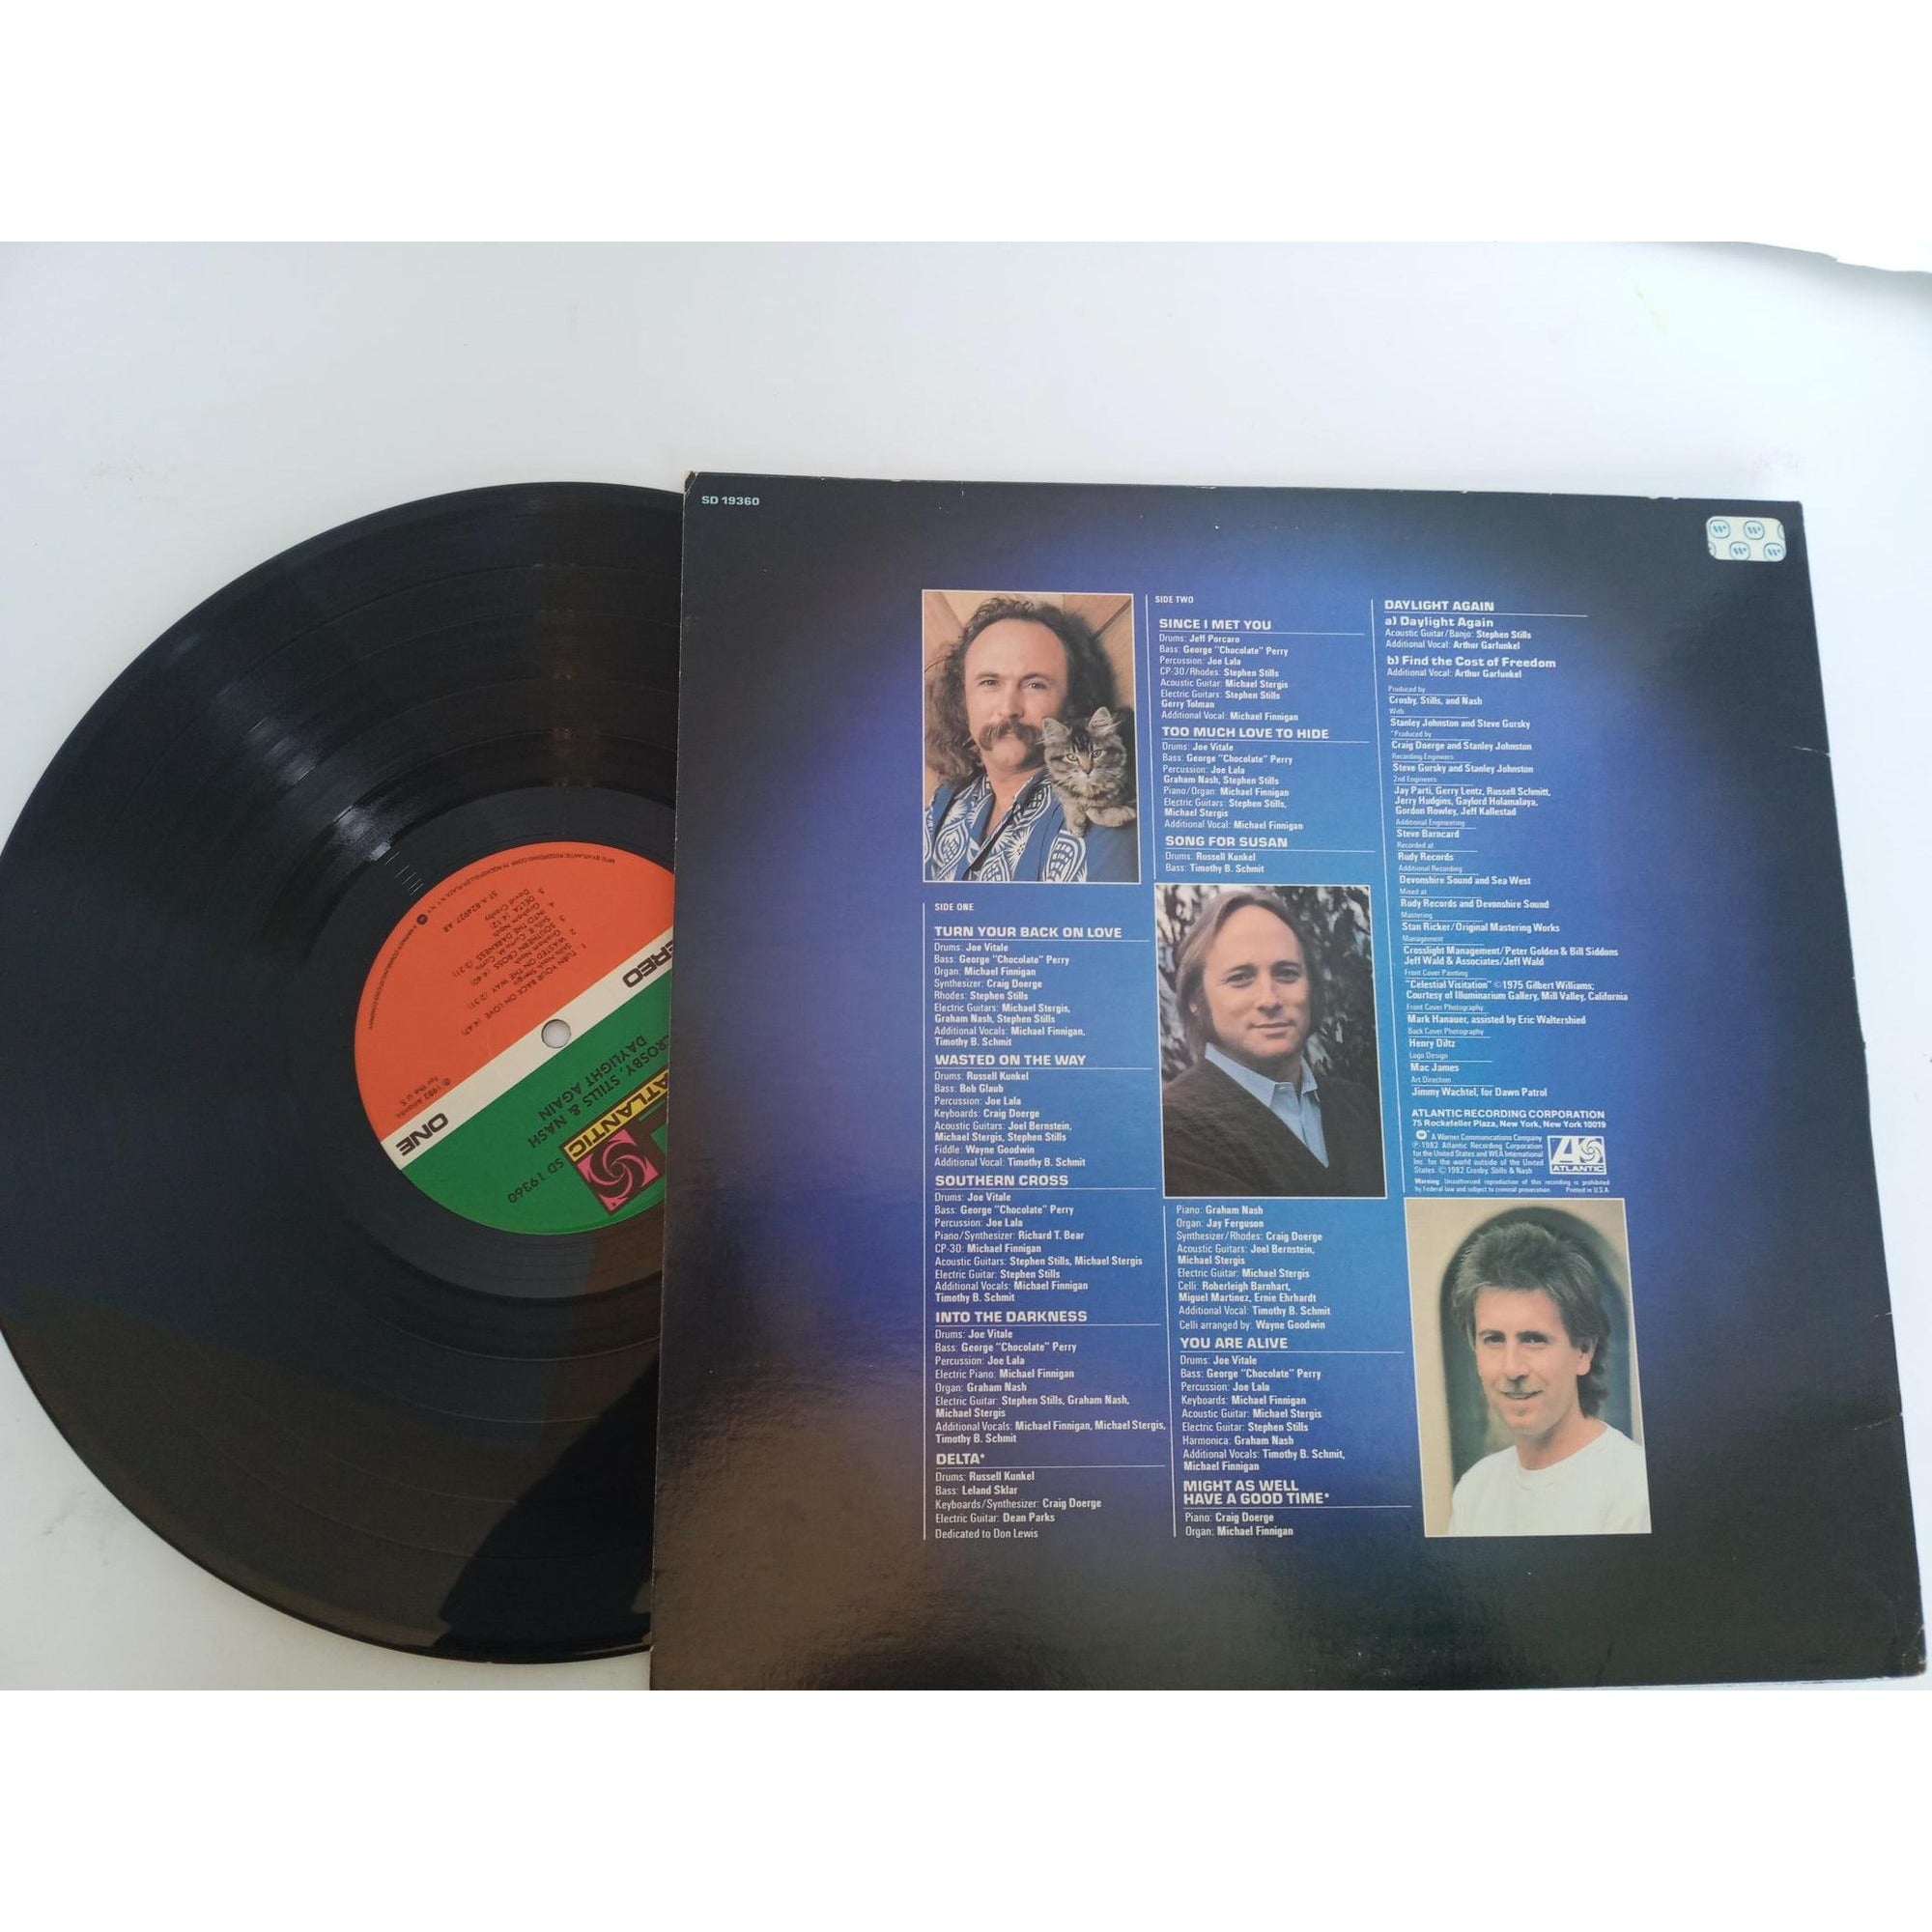 Crosby Stills and Nash "Daylight Again" LP signed with proof